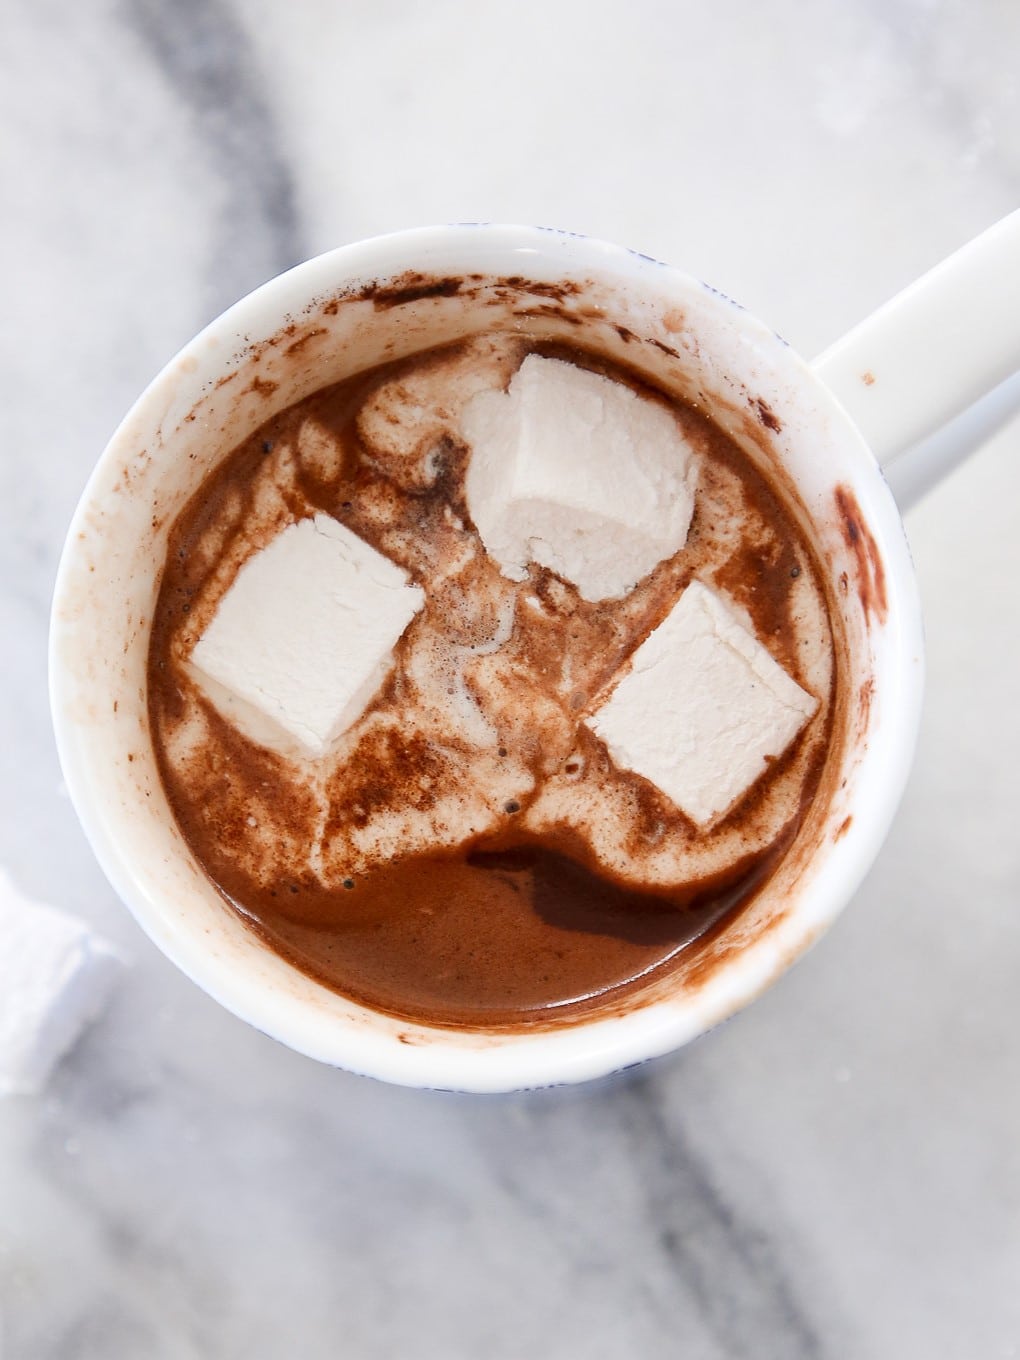 Easy chocolate dessert of homemade hot chocolate on white marble countertop.